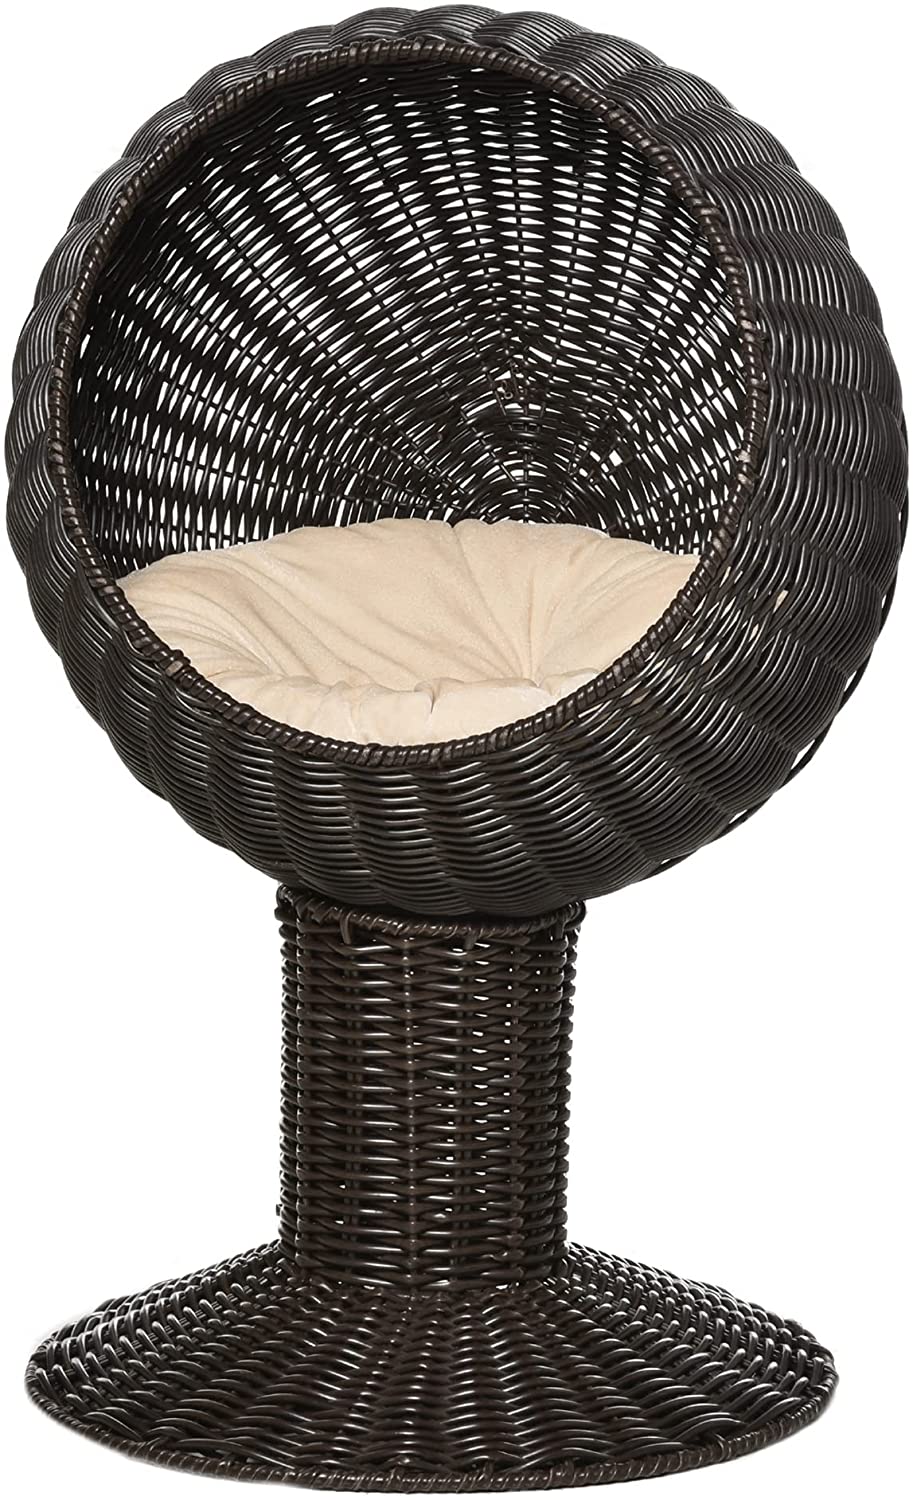 PawHut 28 Hooded Rattan Wicker Round Elevated Condo Cat Bed